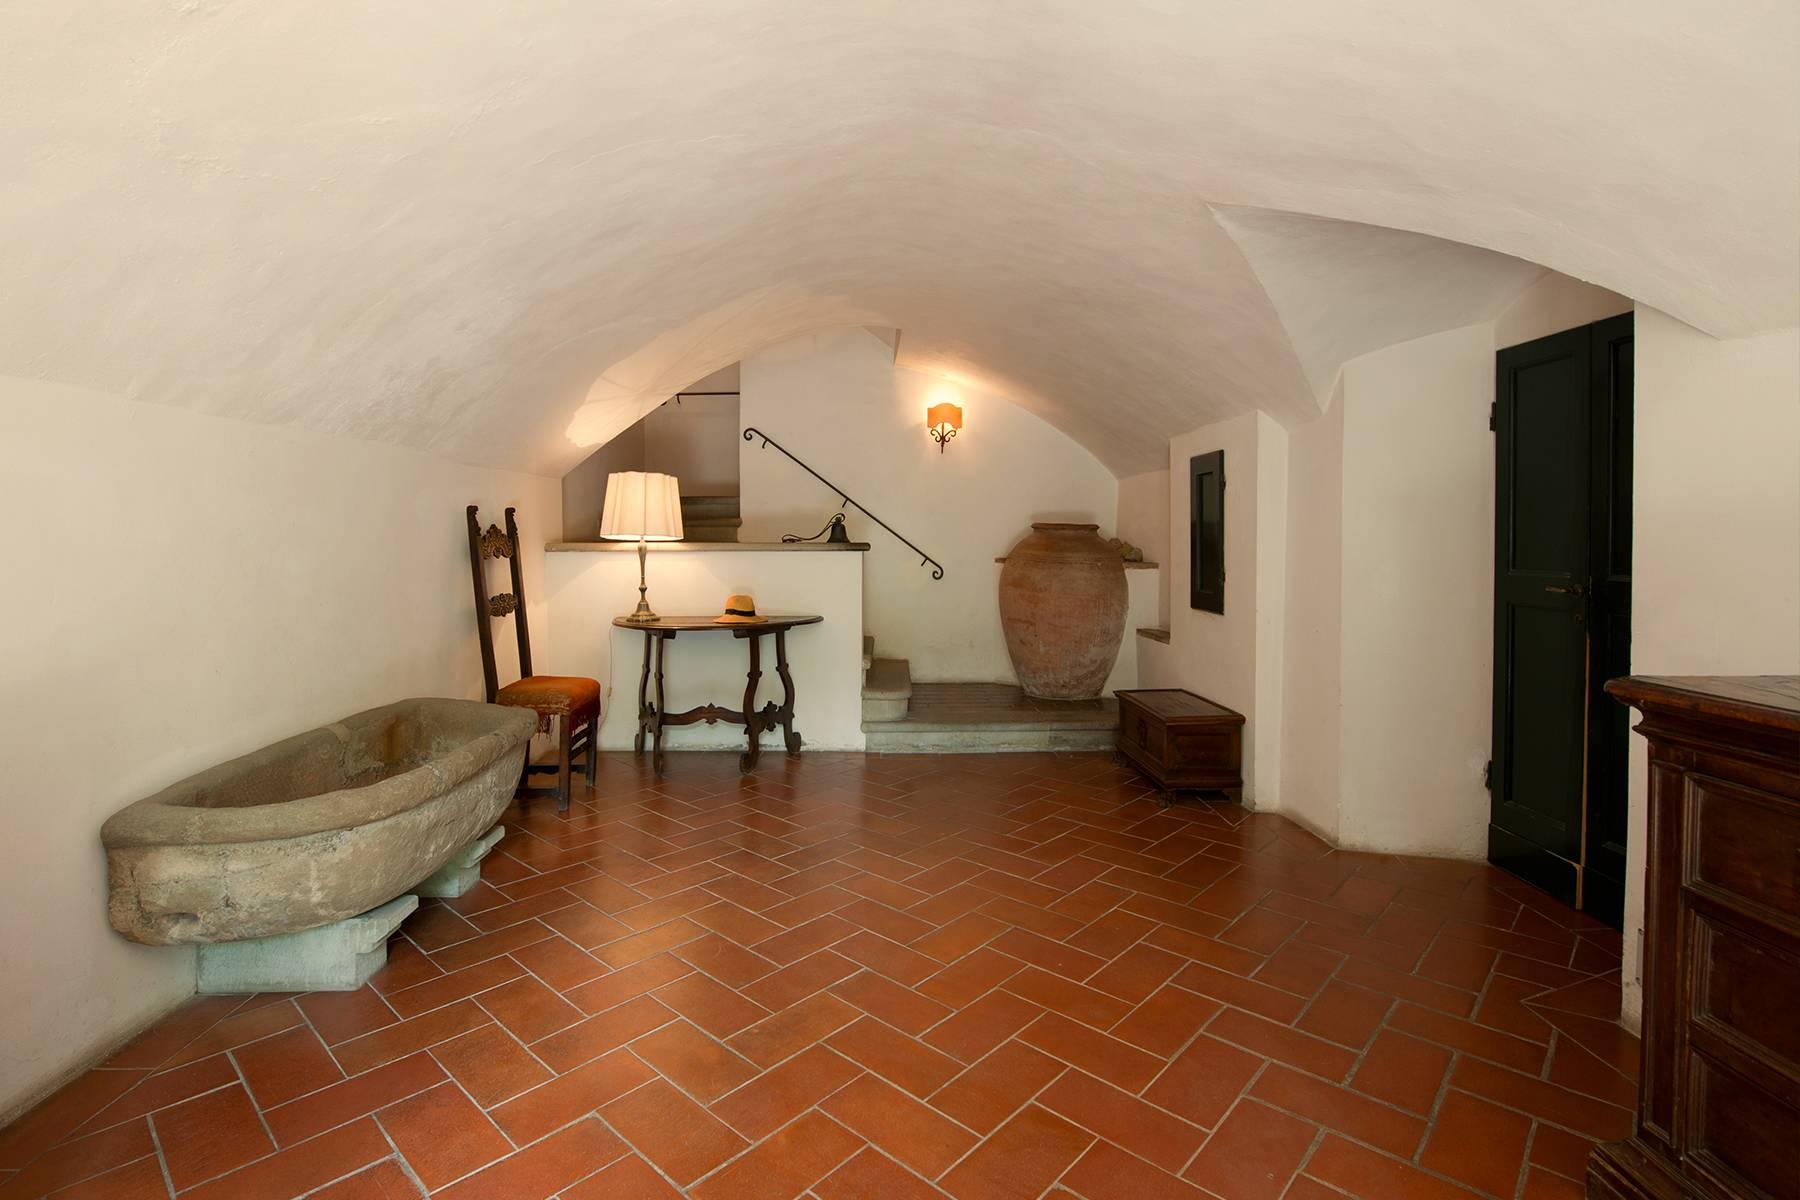 Large period farmhouse in the most renowned olive production area close to Florence - 25